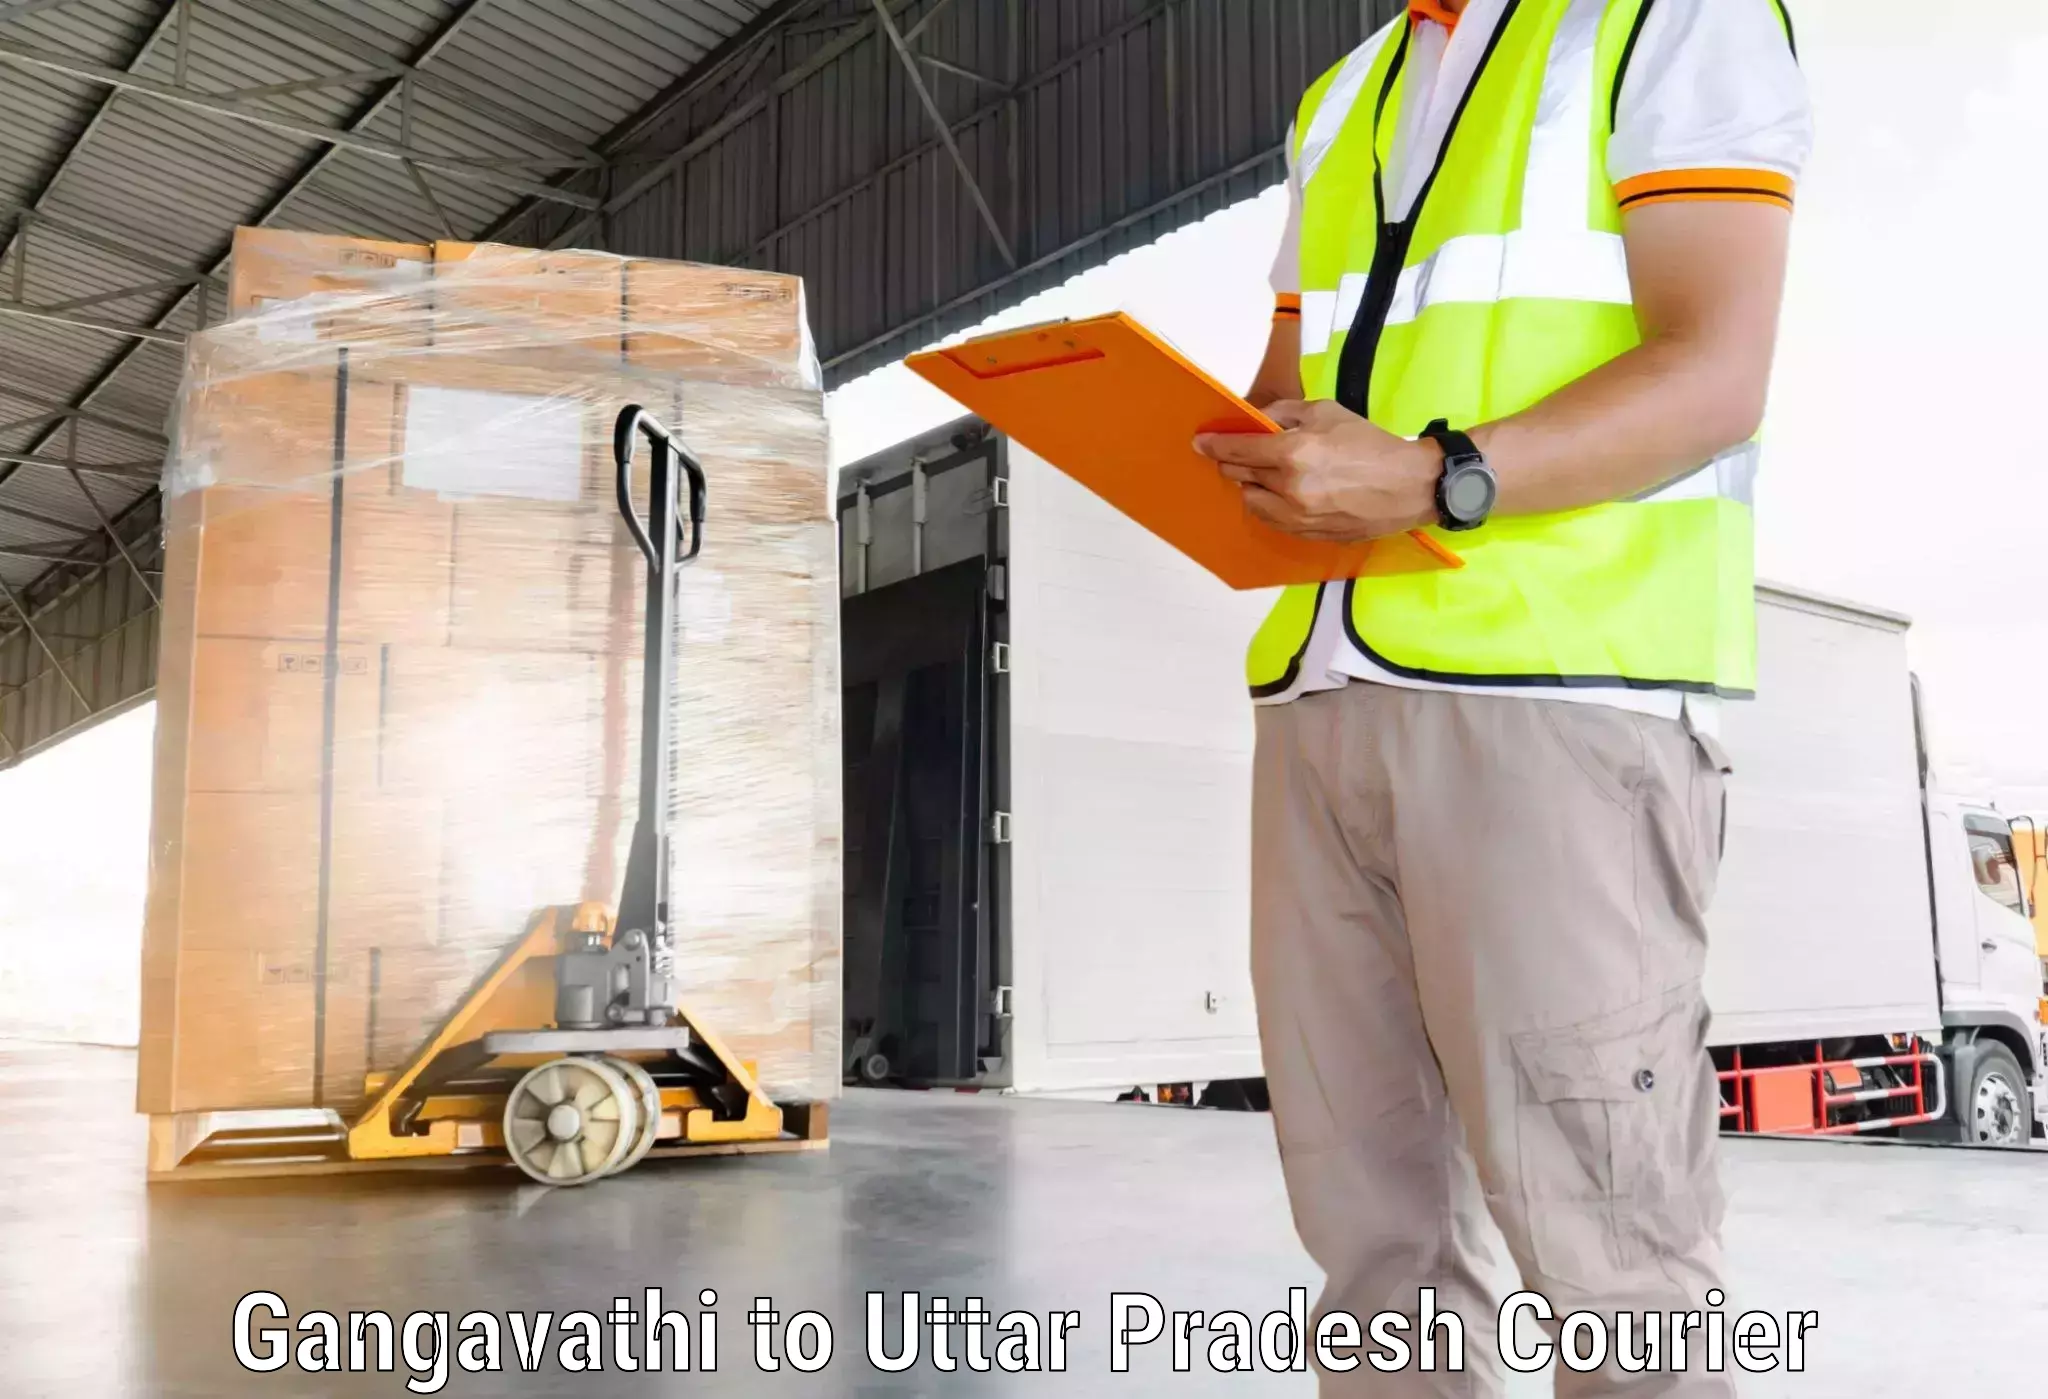 On-call courier service Gangavathi to Unchahar